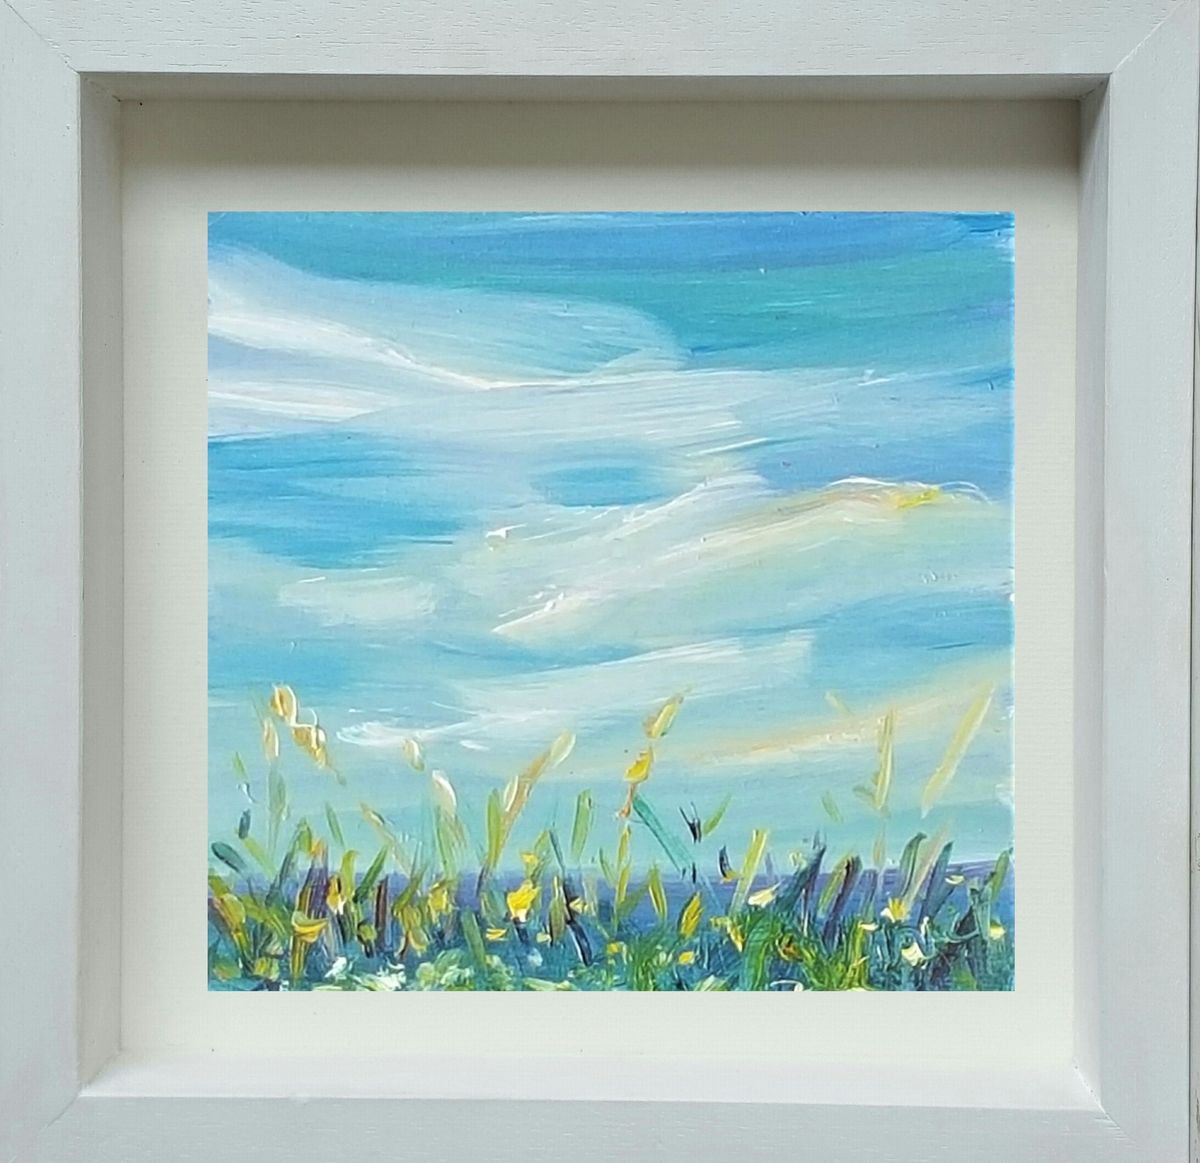 Sunny morning daydream by Niki Purcell - Irish Landscape Painting